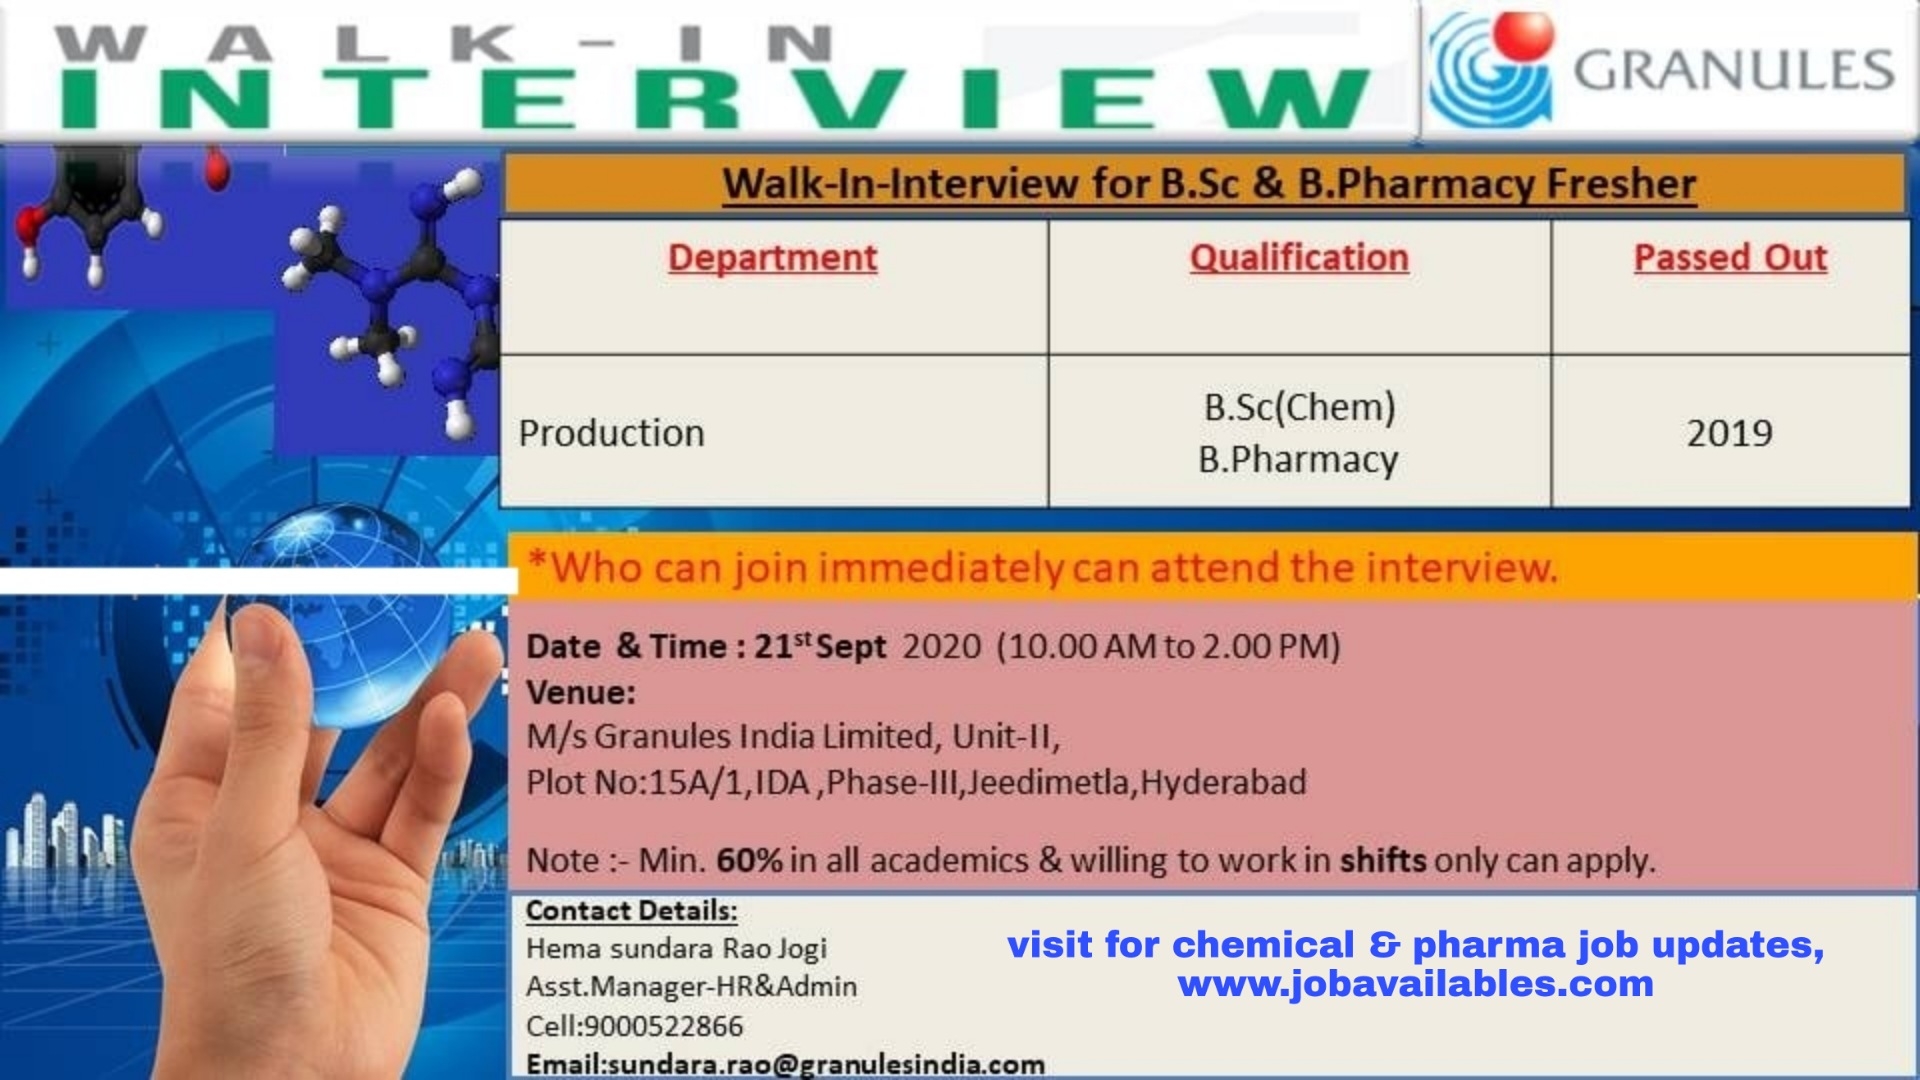 Job Availables, Granules India Limited Walk-In Interview For Fresher  BSc/ B.Pharmacy